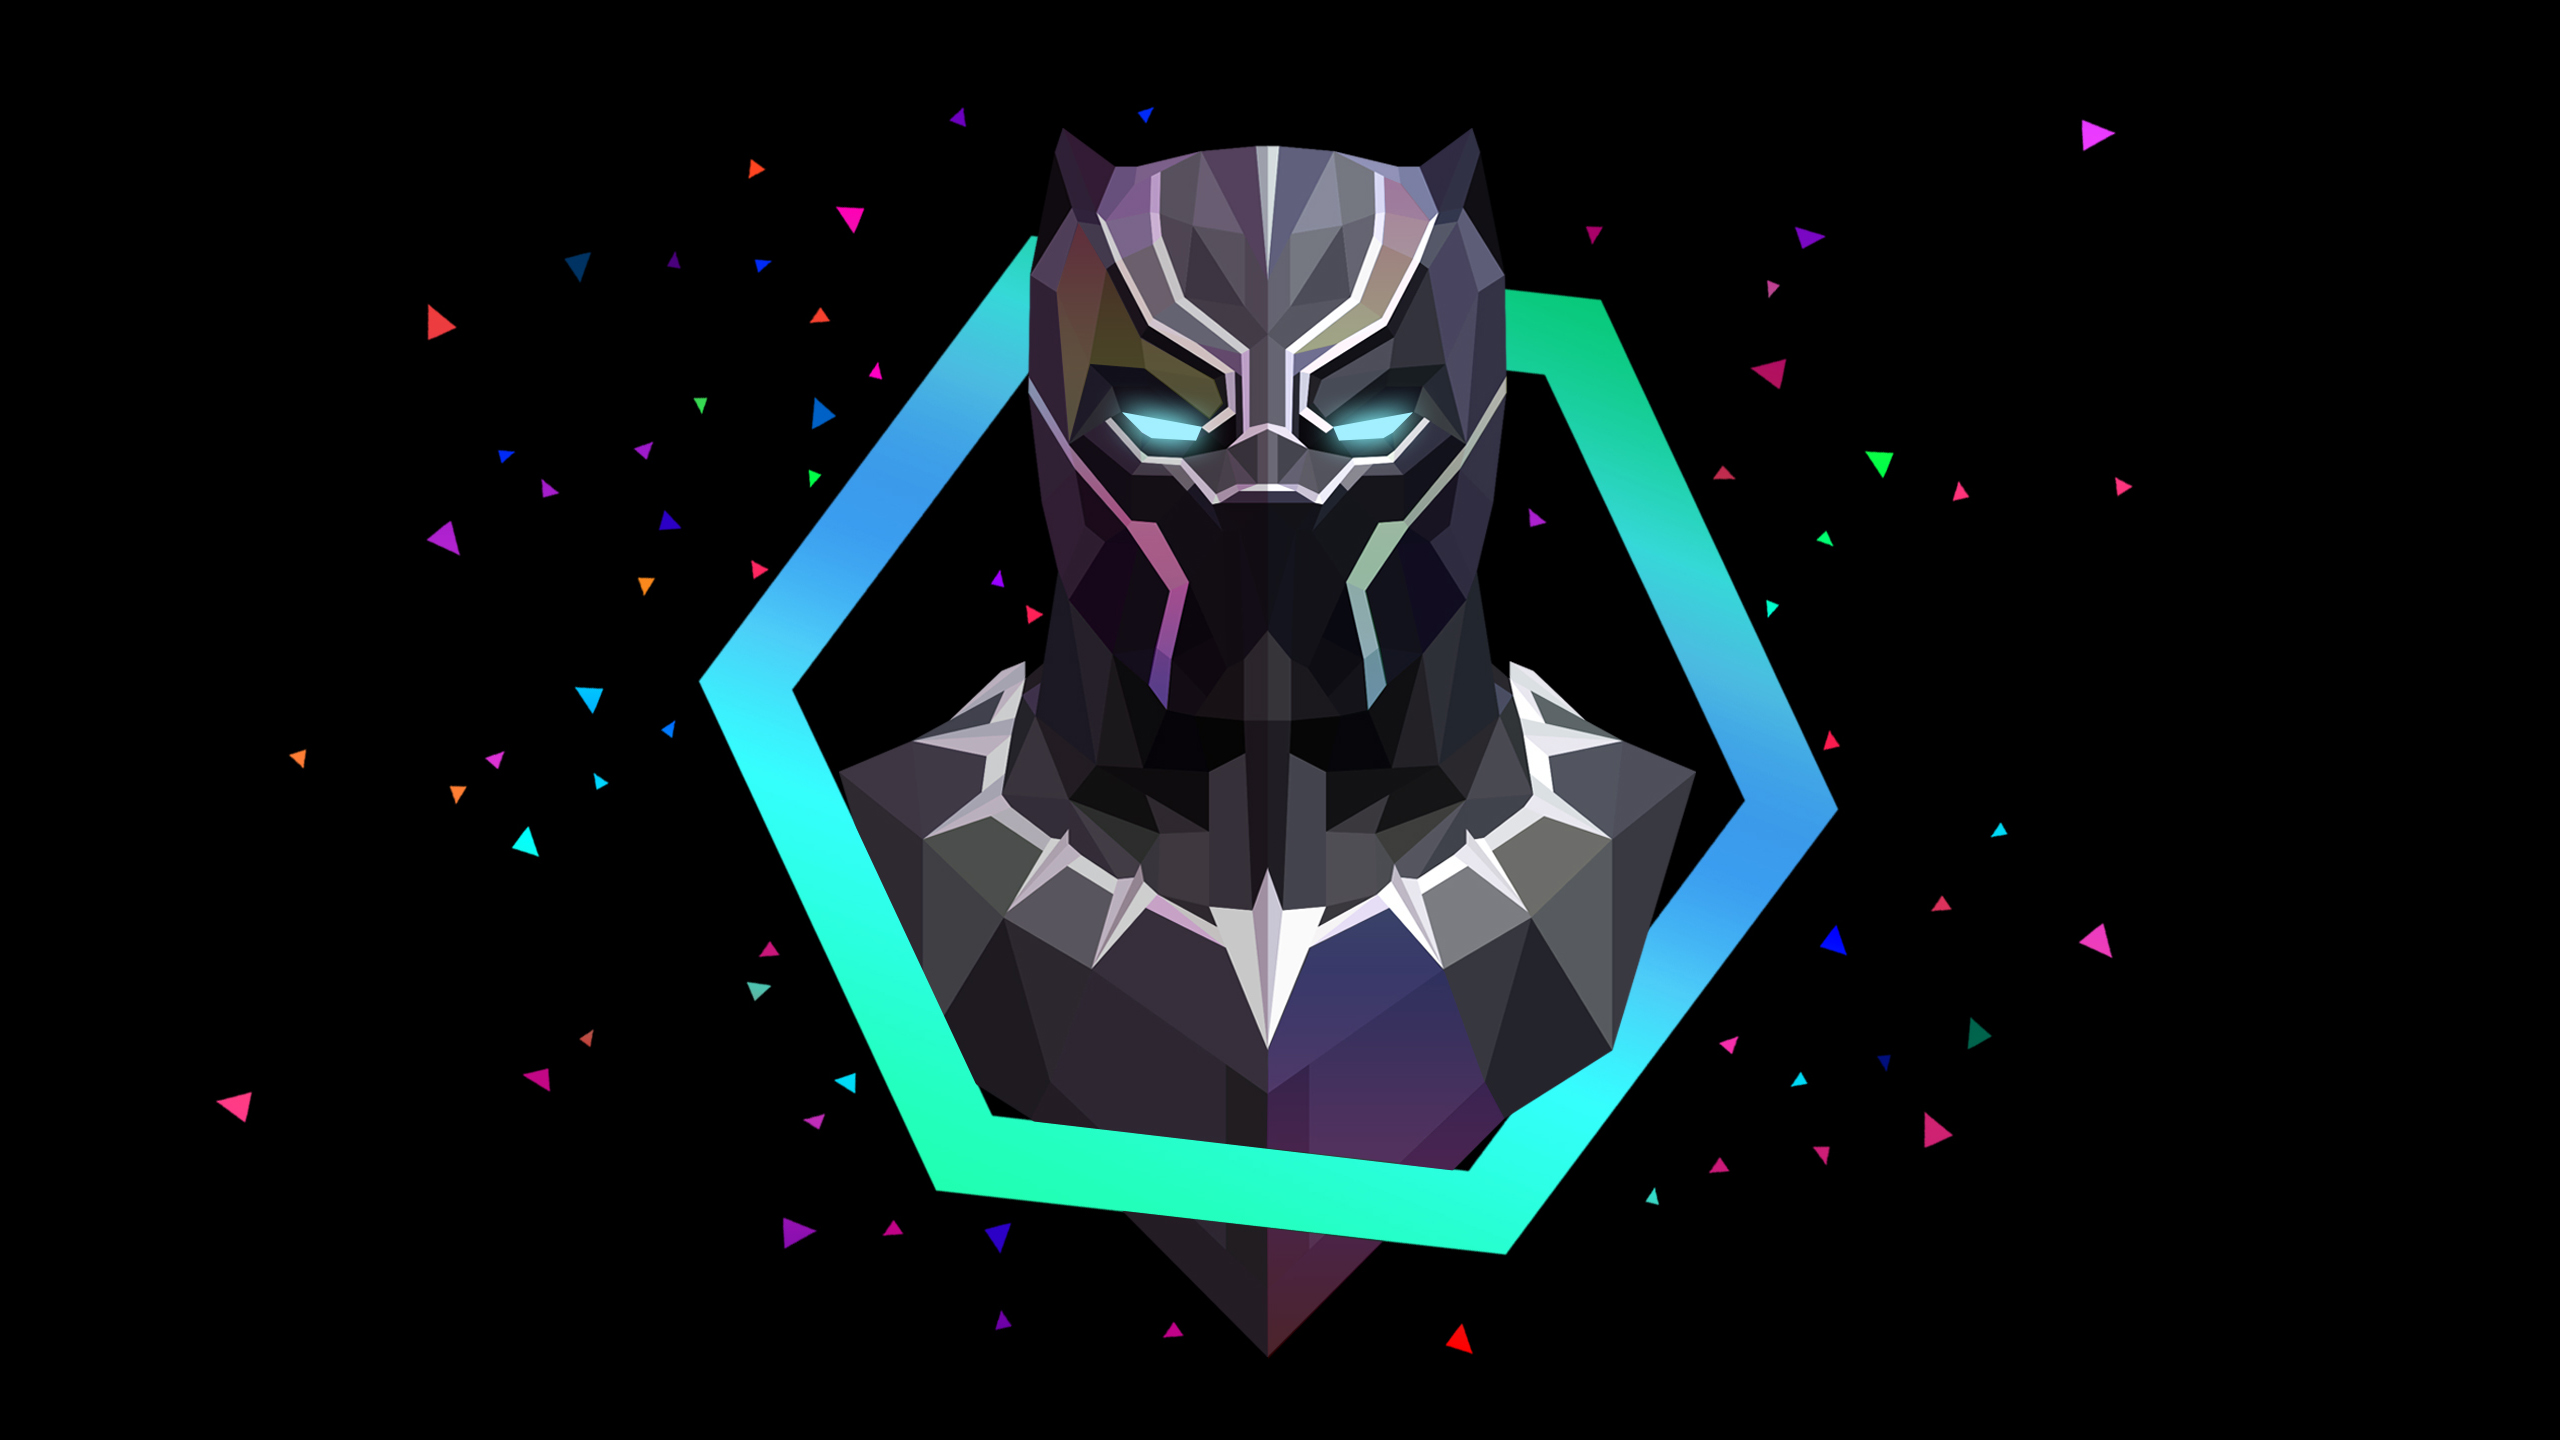 Black Panther Lowpoly Artwork Wallpapers